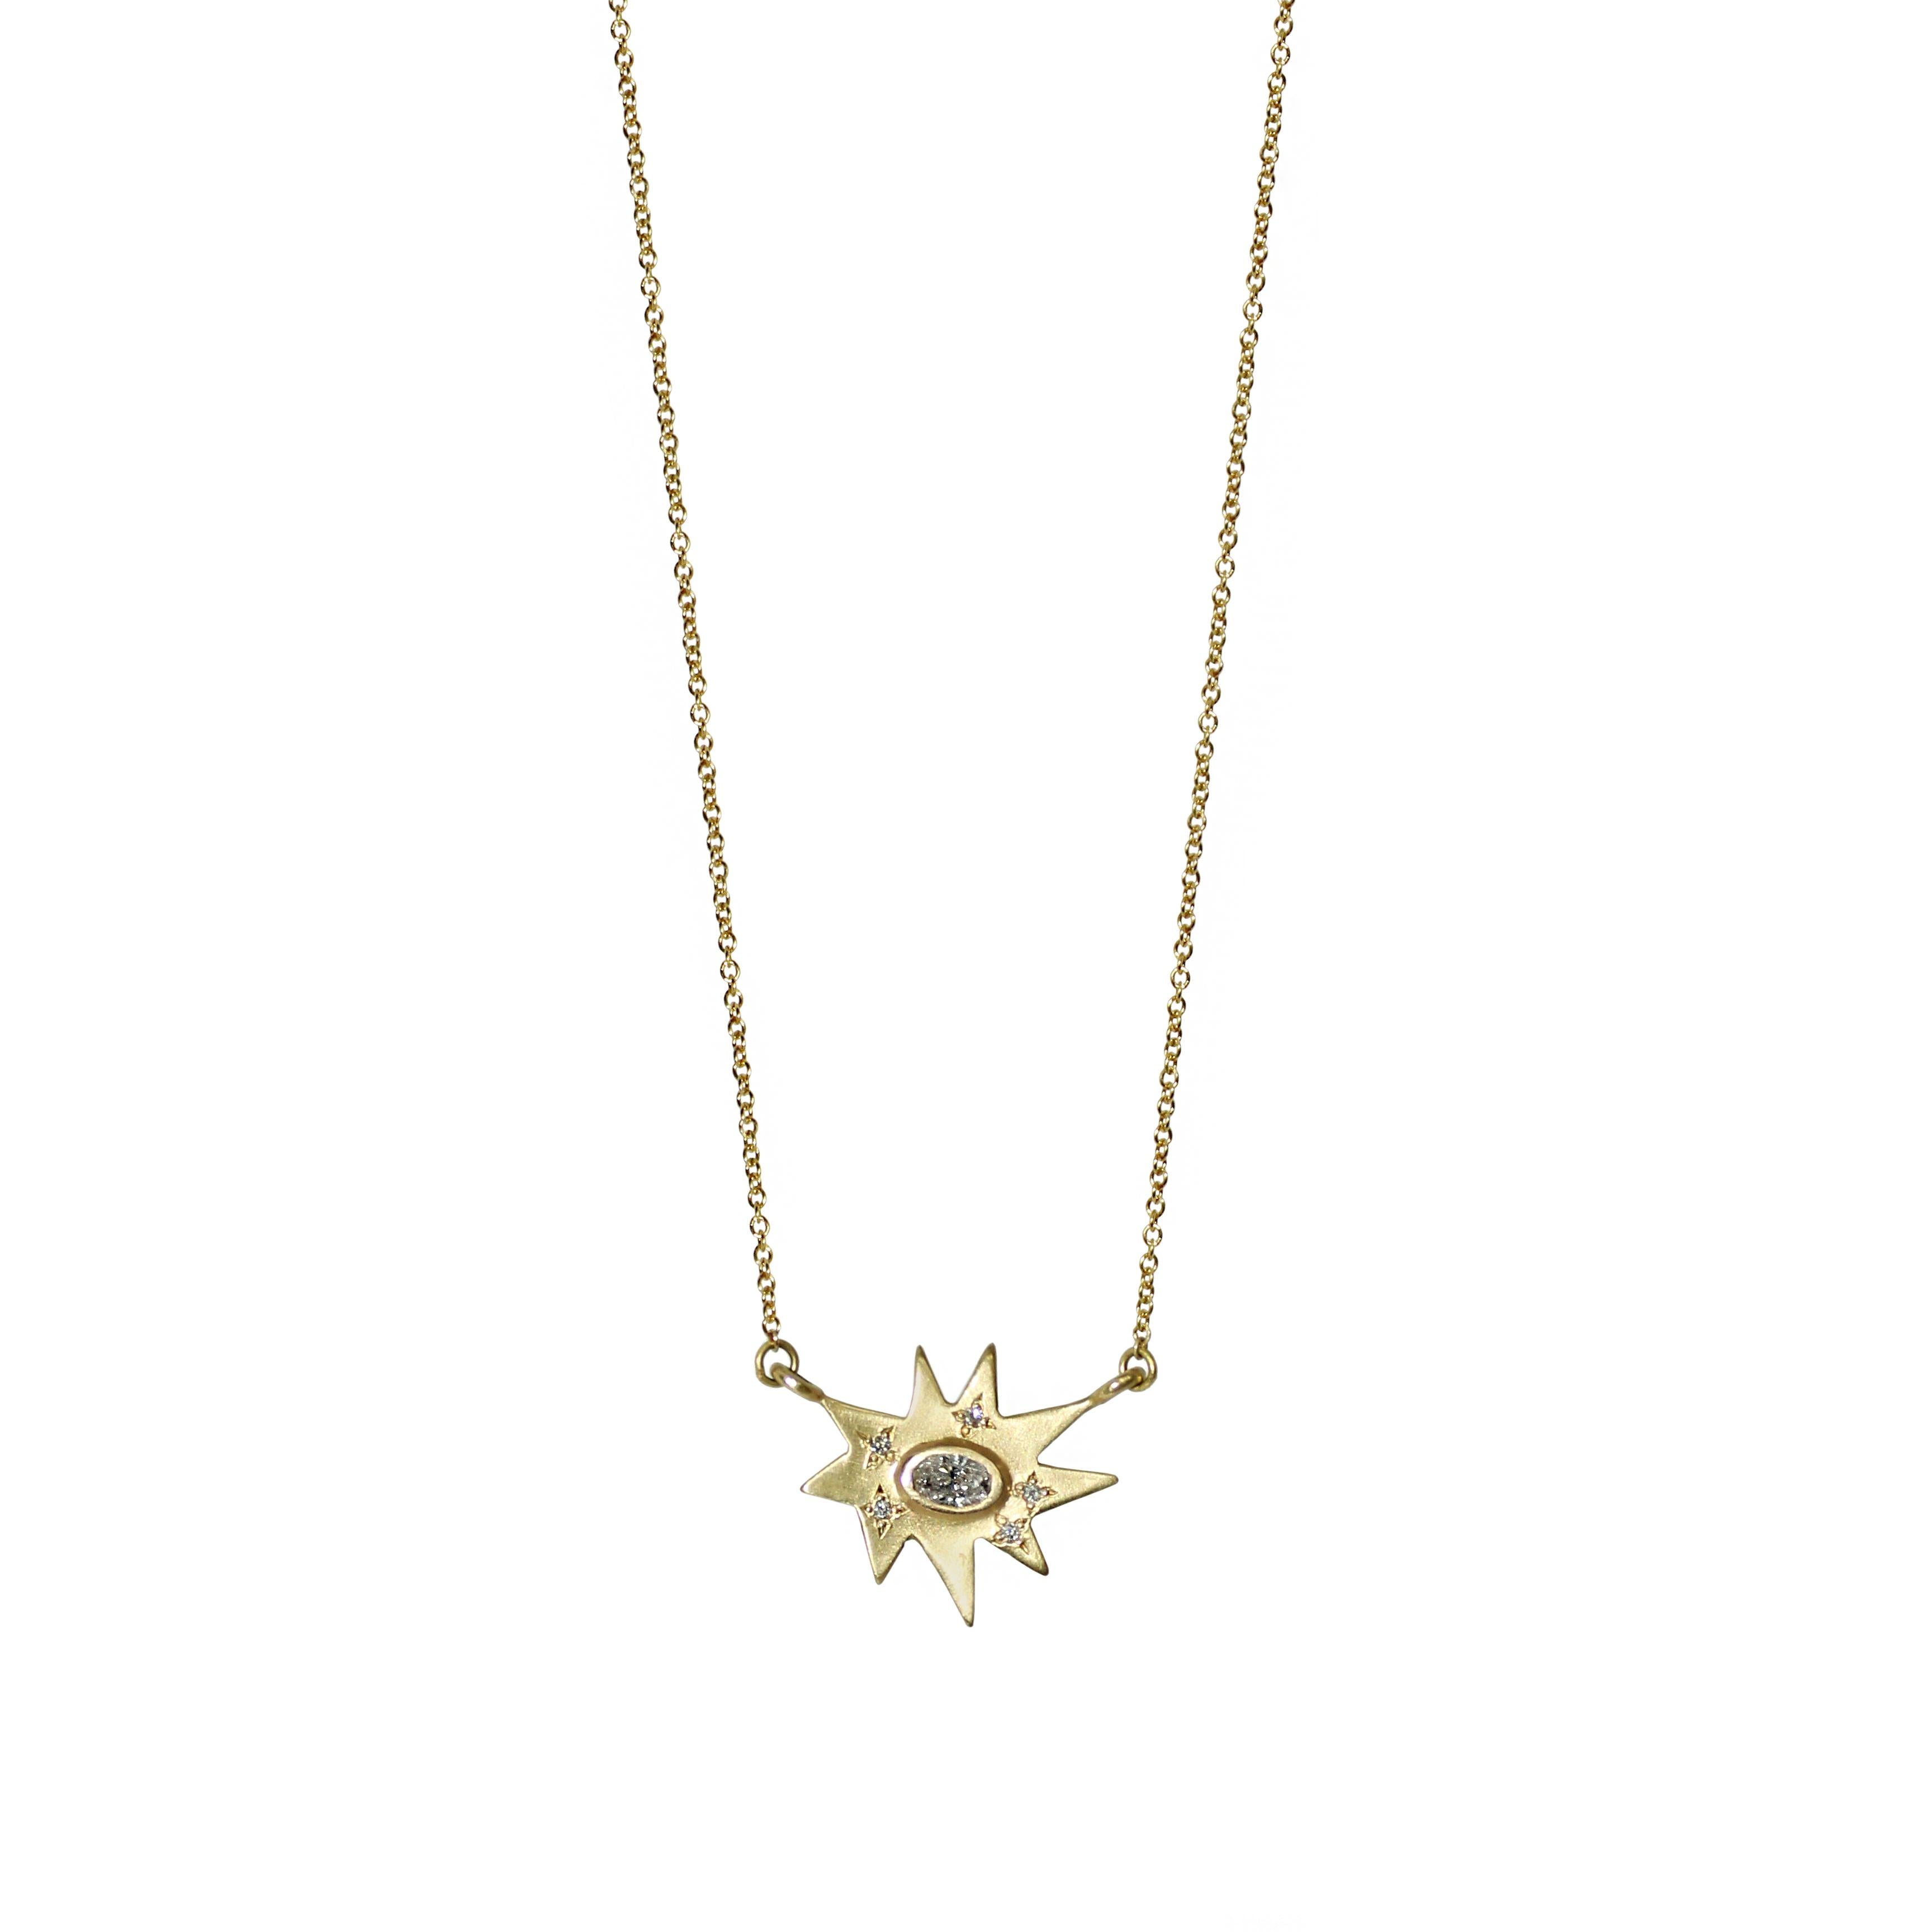 Emily Kuvin Gold and Diamond Star Necklace